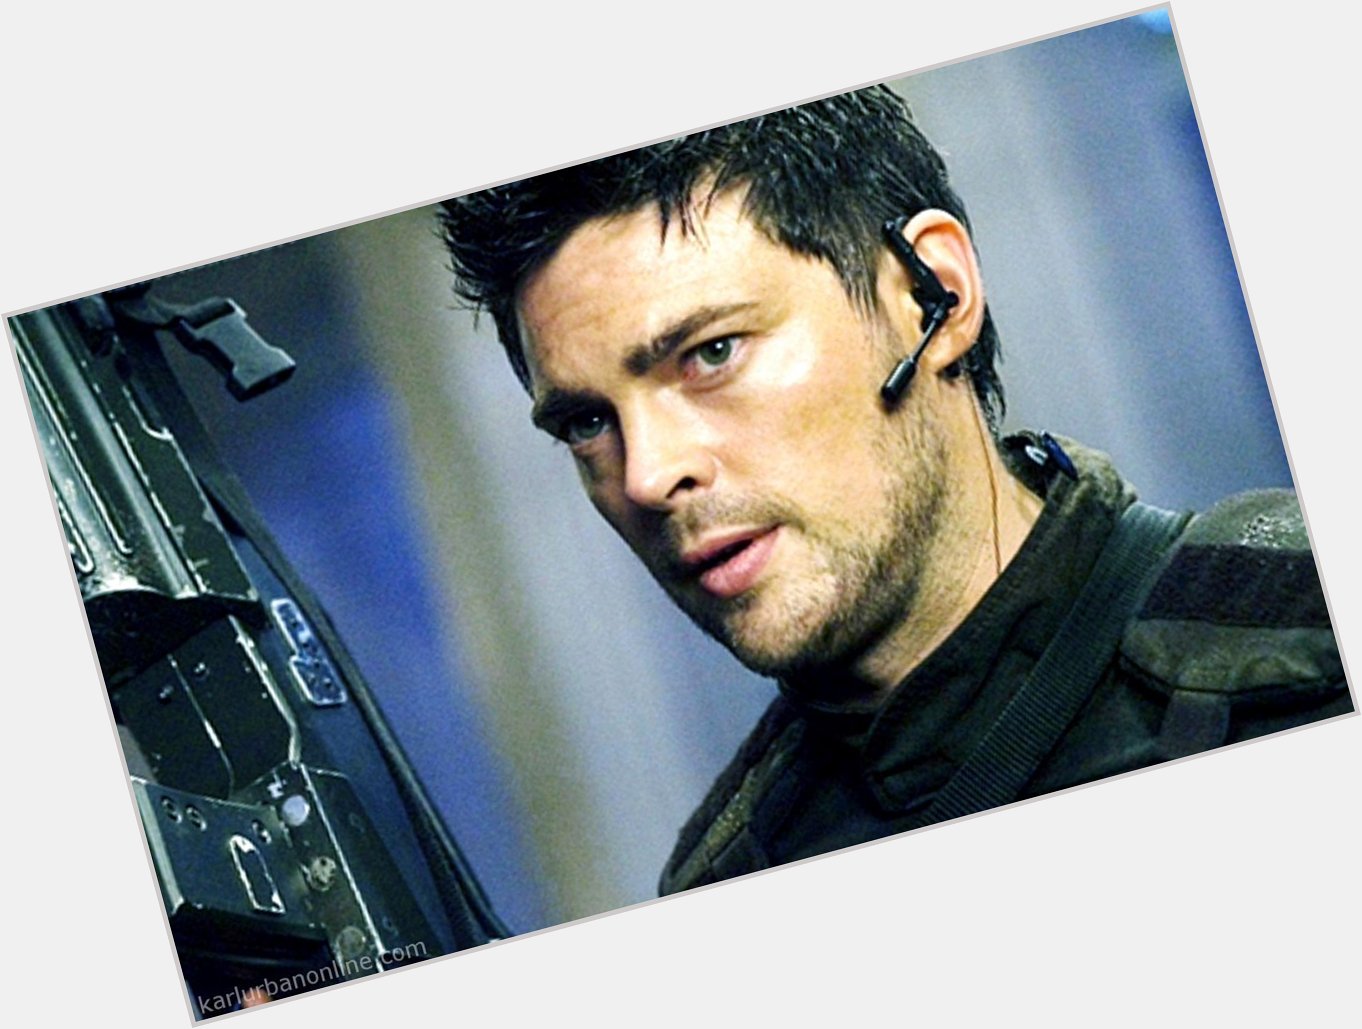 Our fave Karl Urban film is The Bourne Supremacy...Happy Birthday Karl!!! 